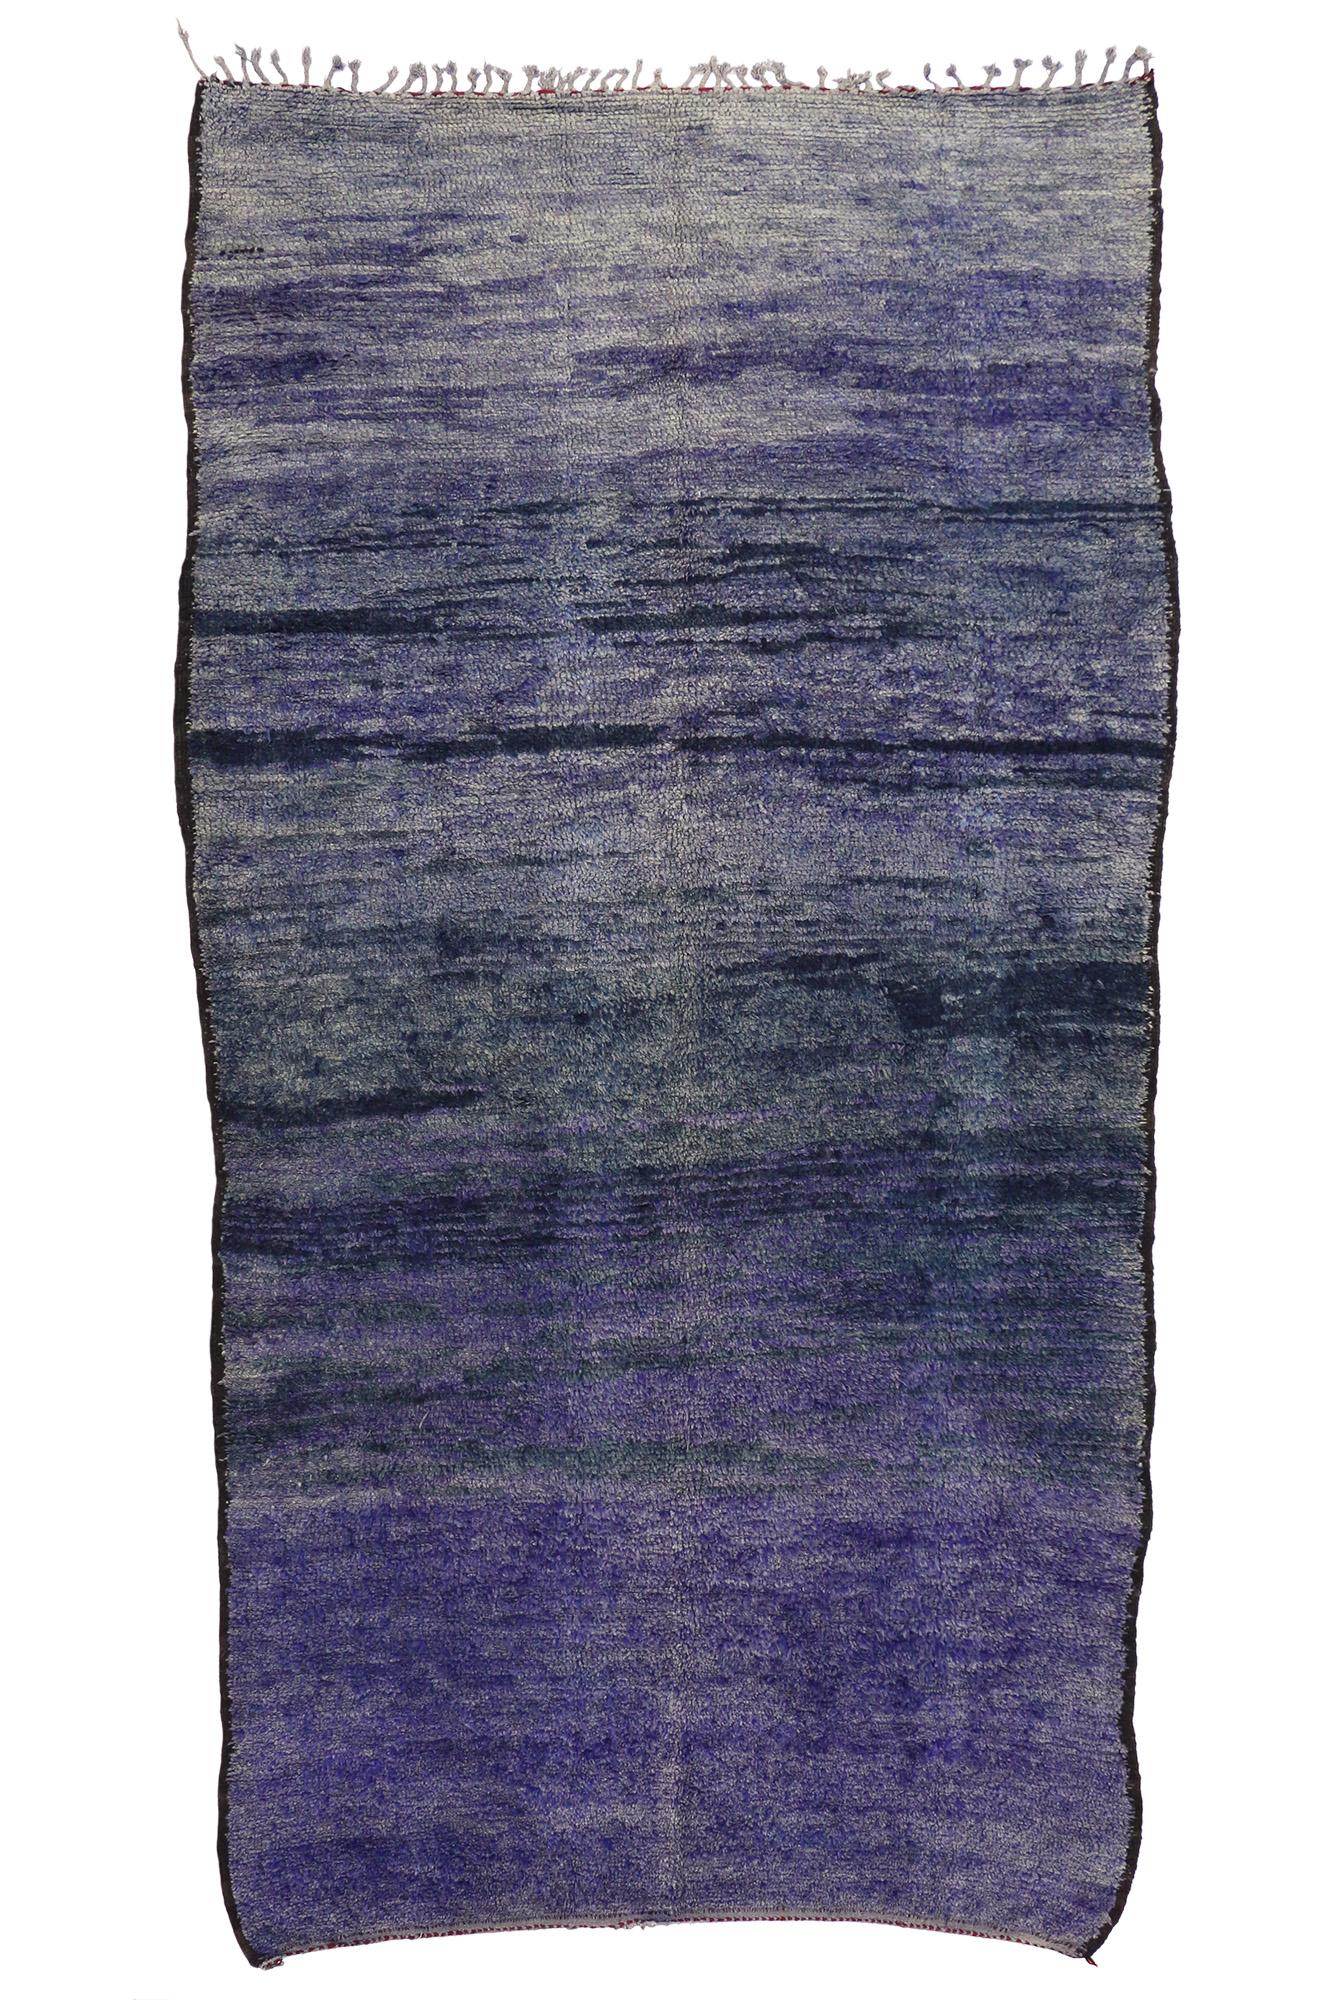 Hand-Knotted Vintage Purple Beni Mrirt Moroccan Rug Inspired by Mark Rothko Chapel For Sale